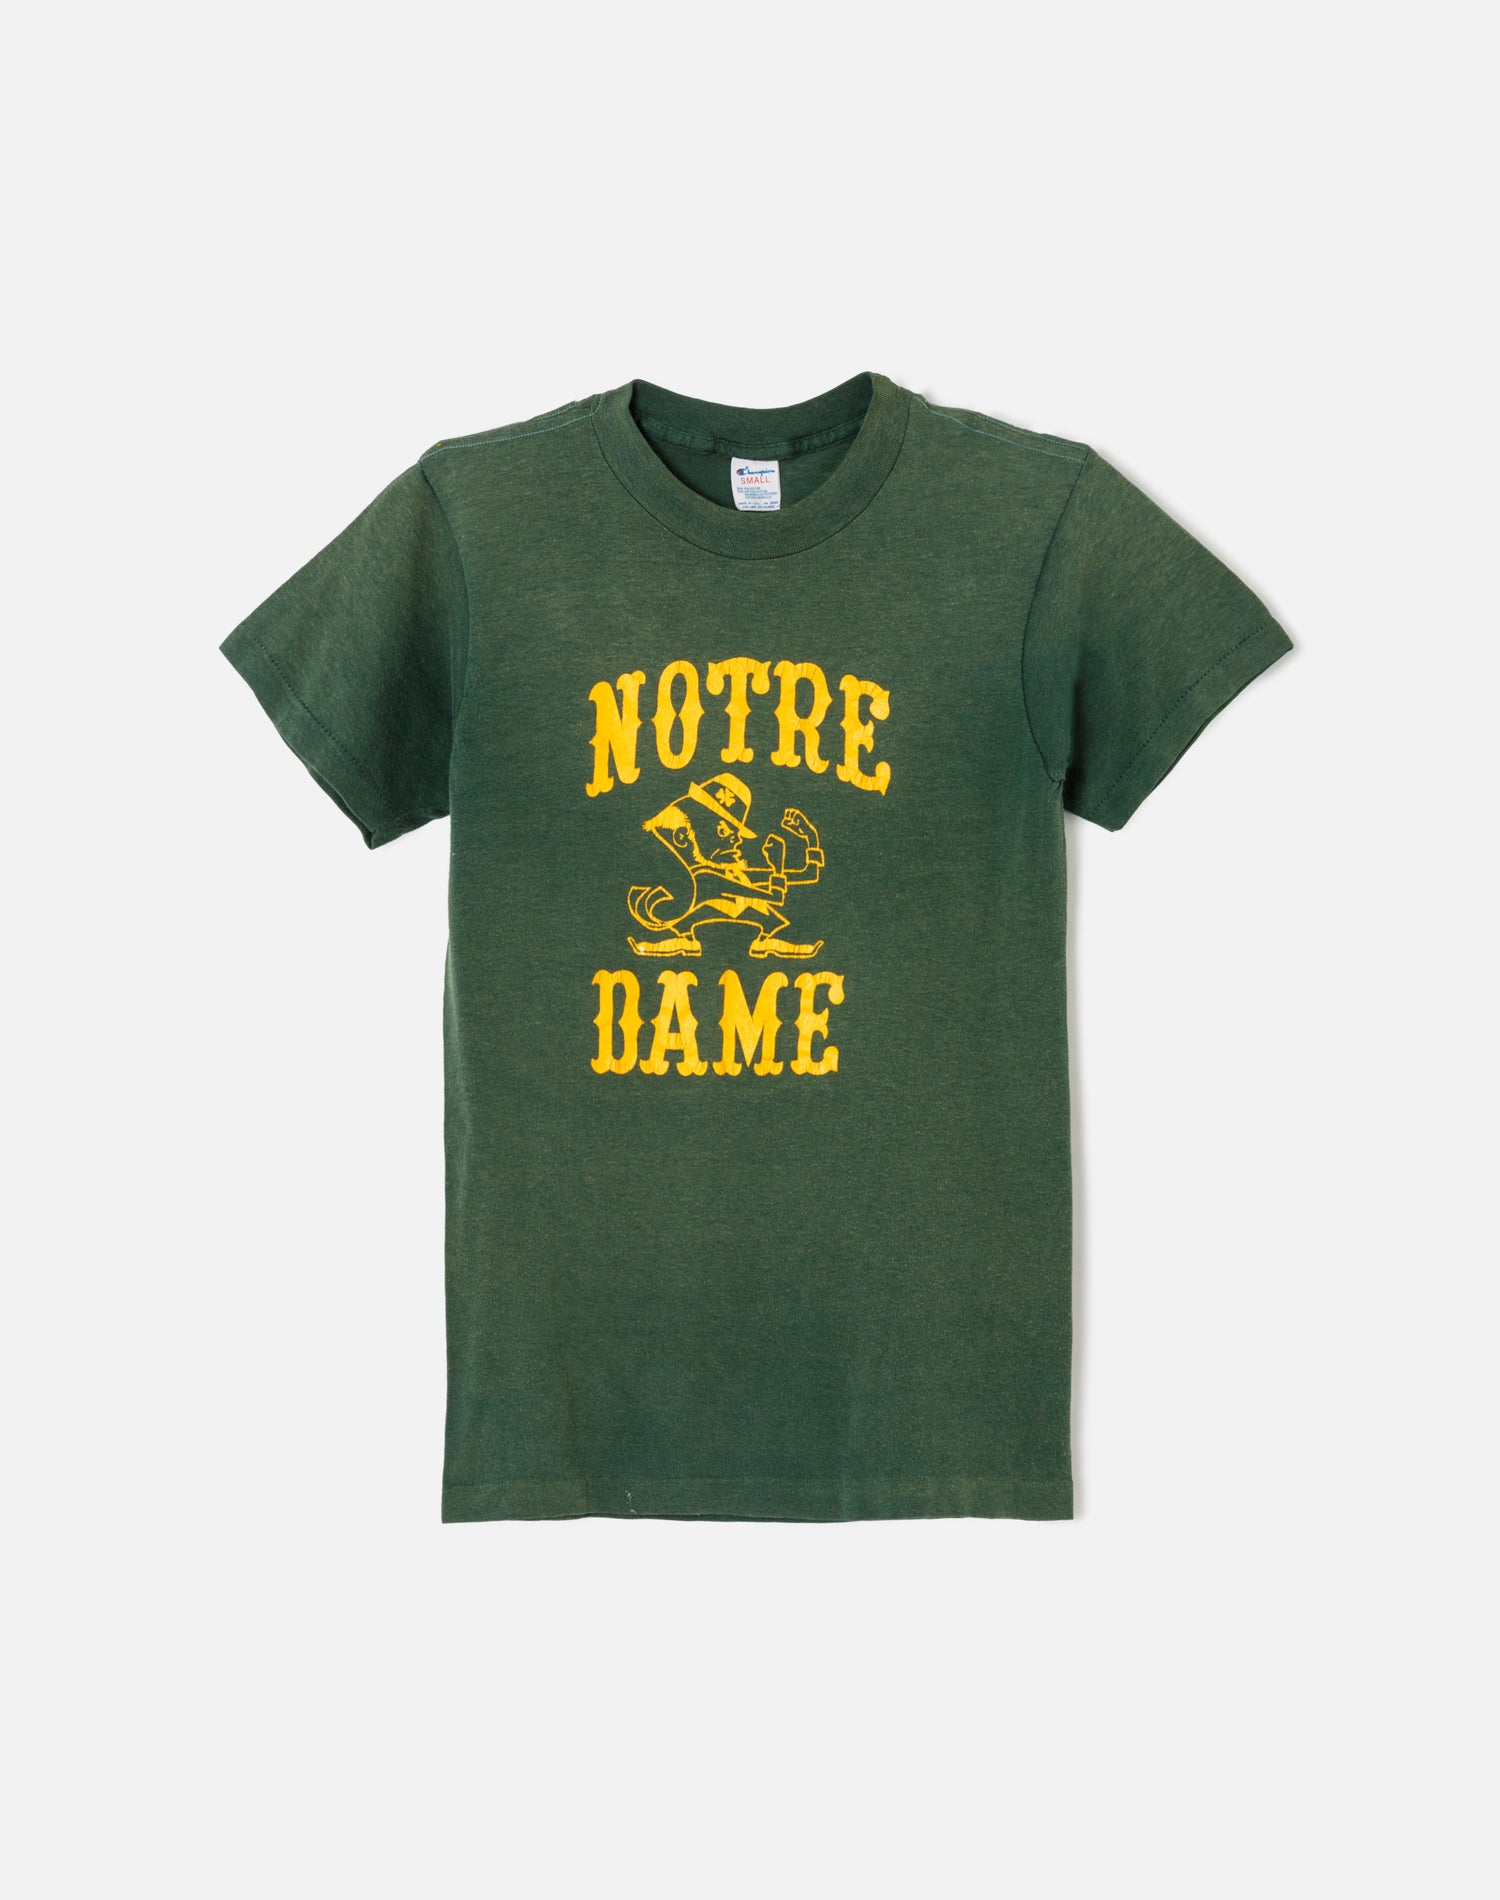 80s Champion Notre Dame Tee